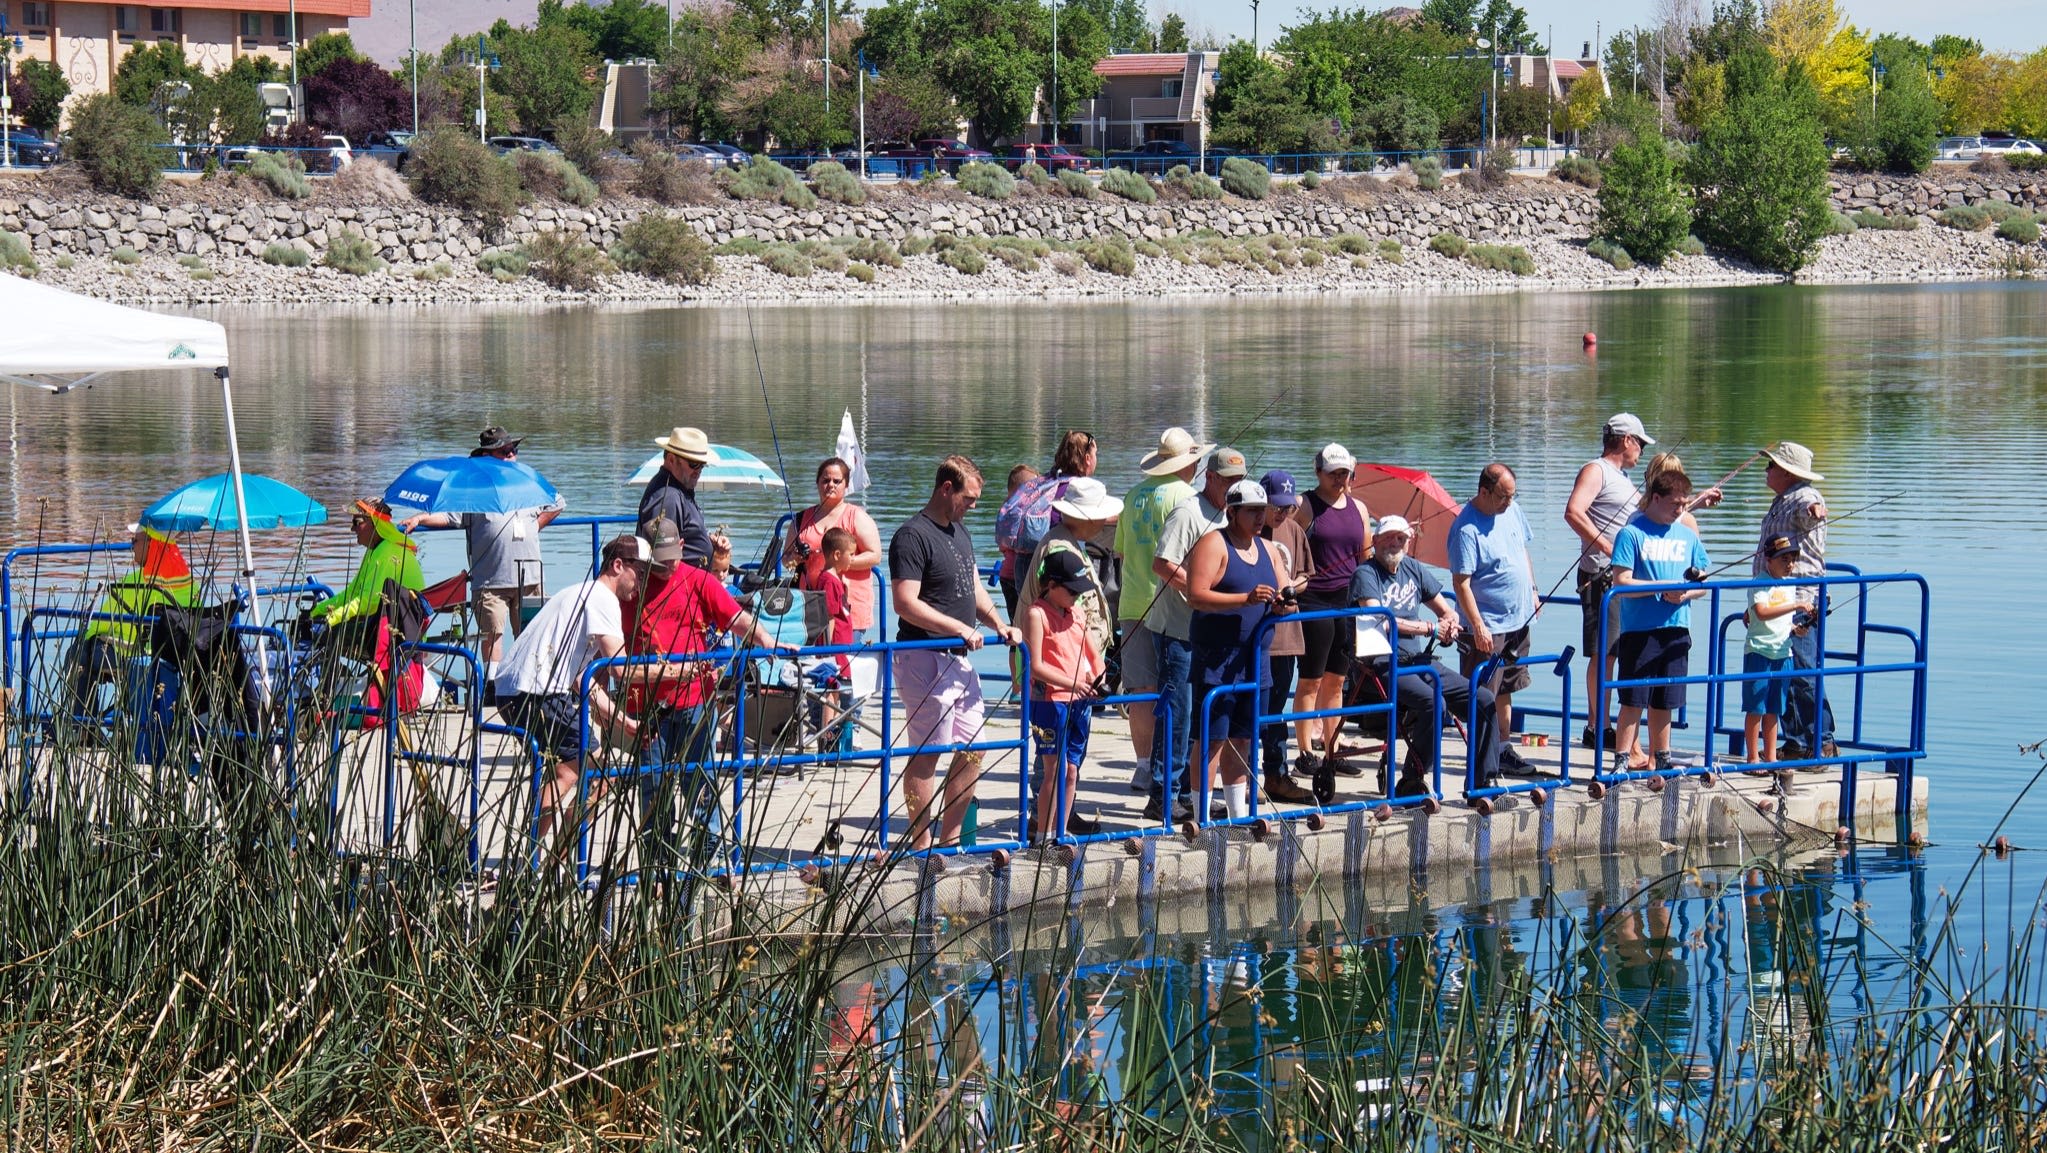 Kids free fishing day set for June 8 at the Sparks Marina